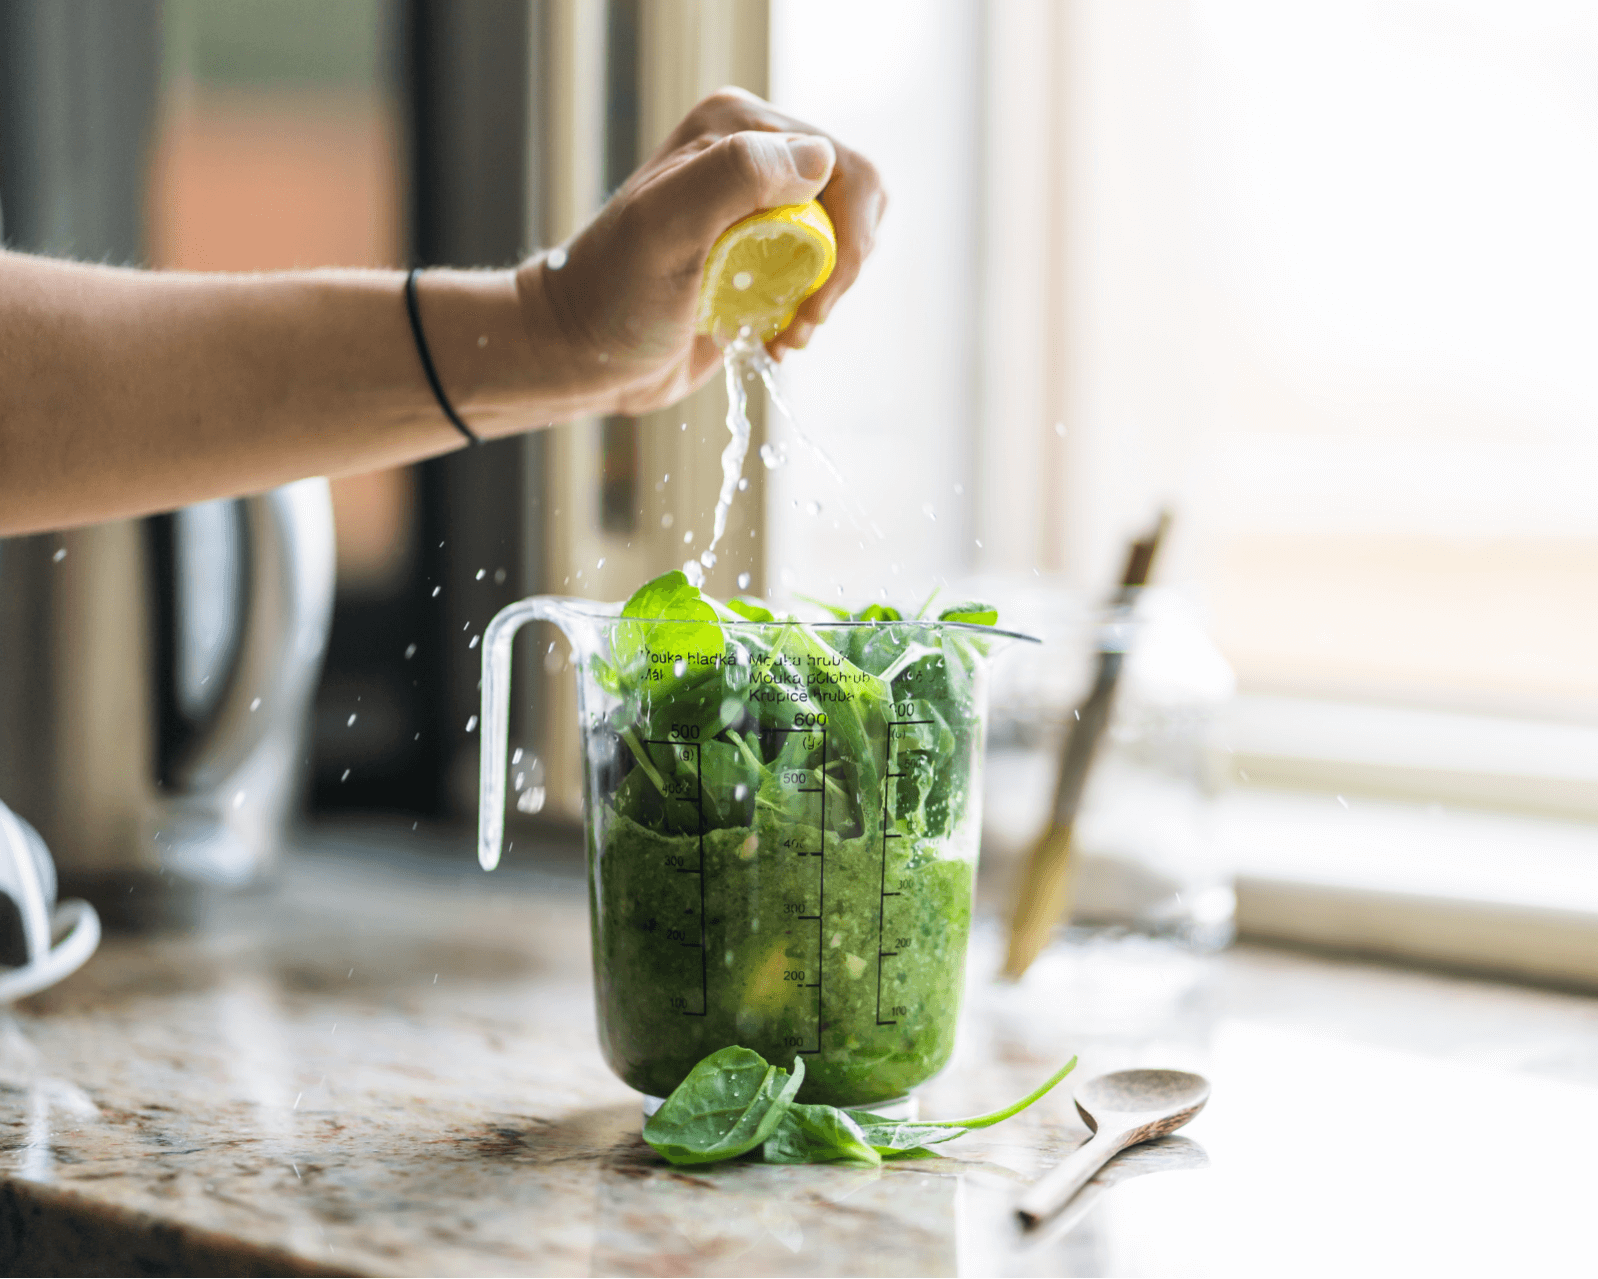 Tasty Drinks to Calm Anxiety and Help You Relax